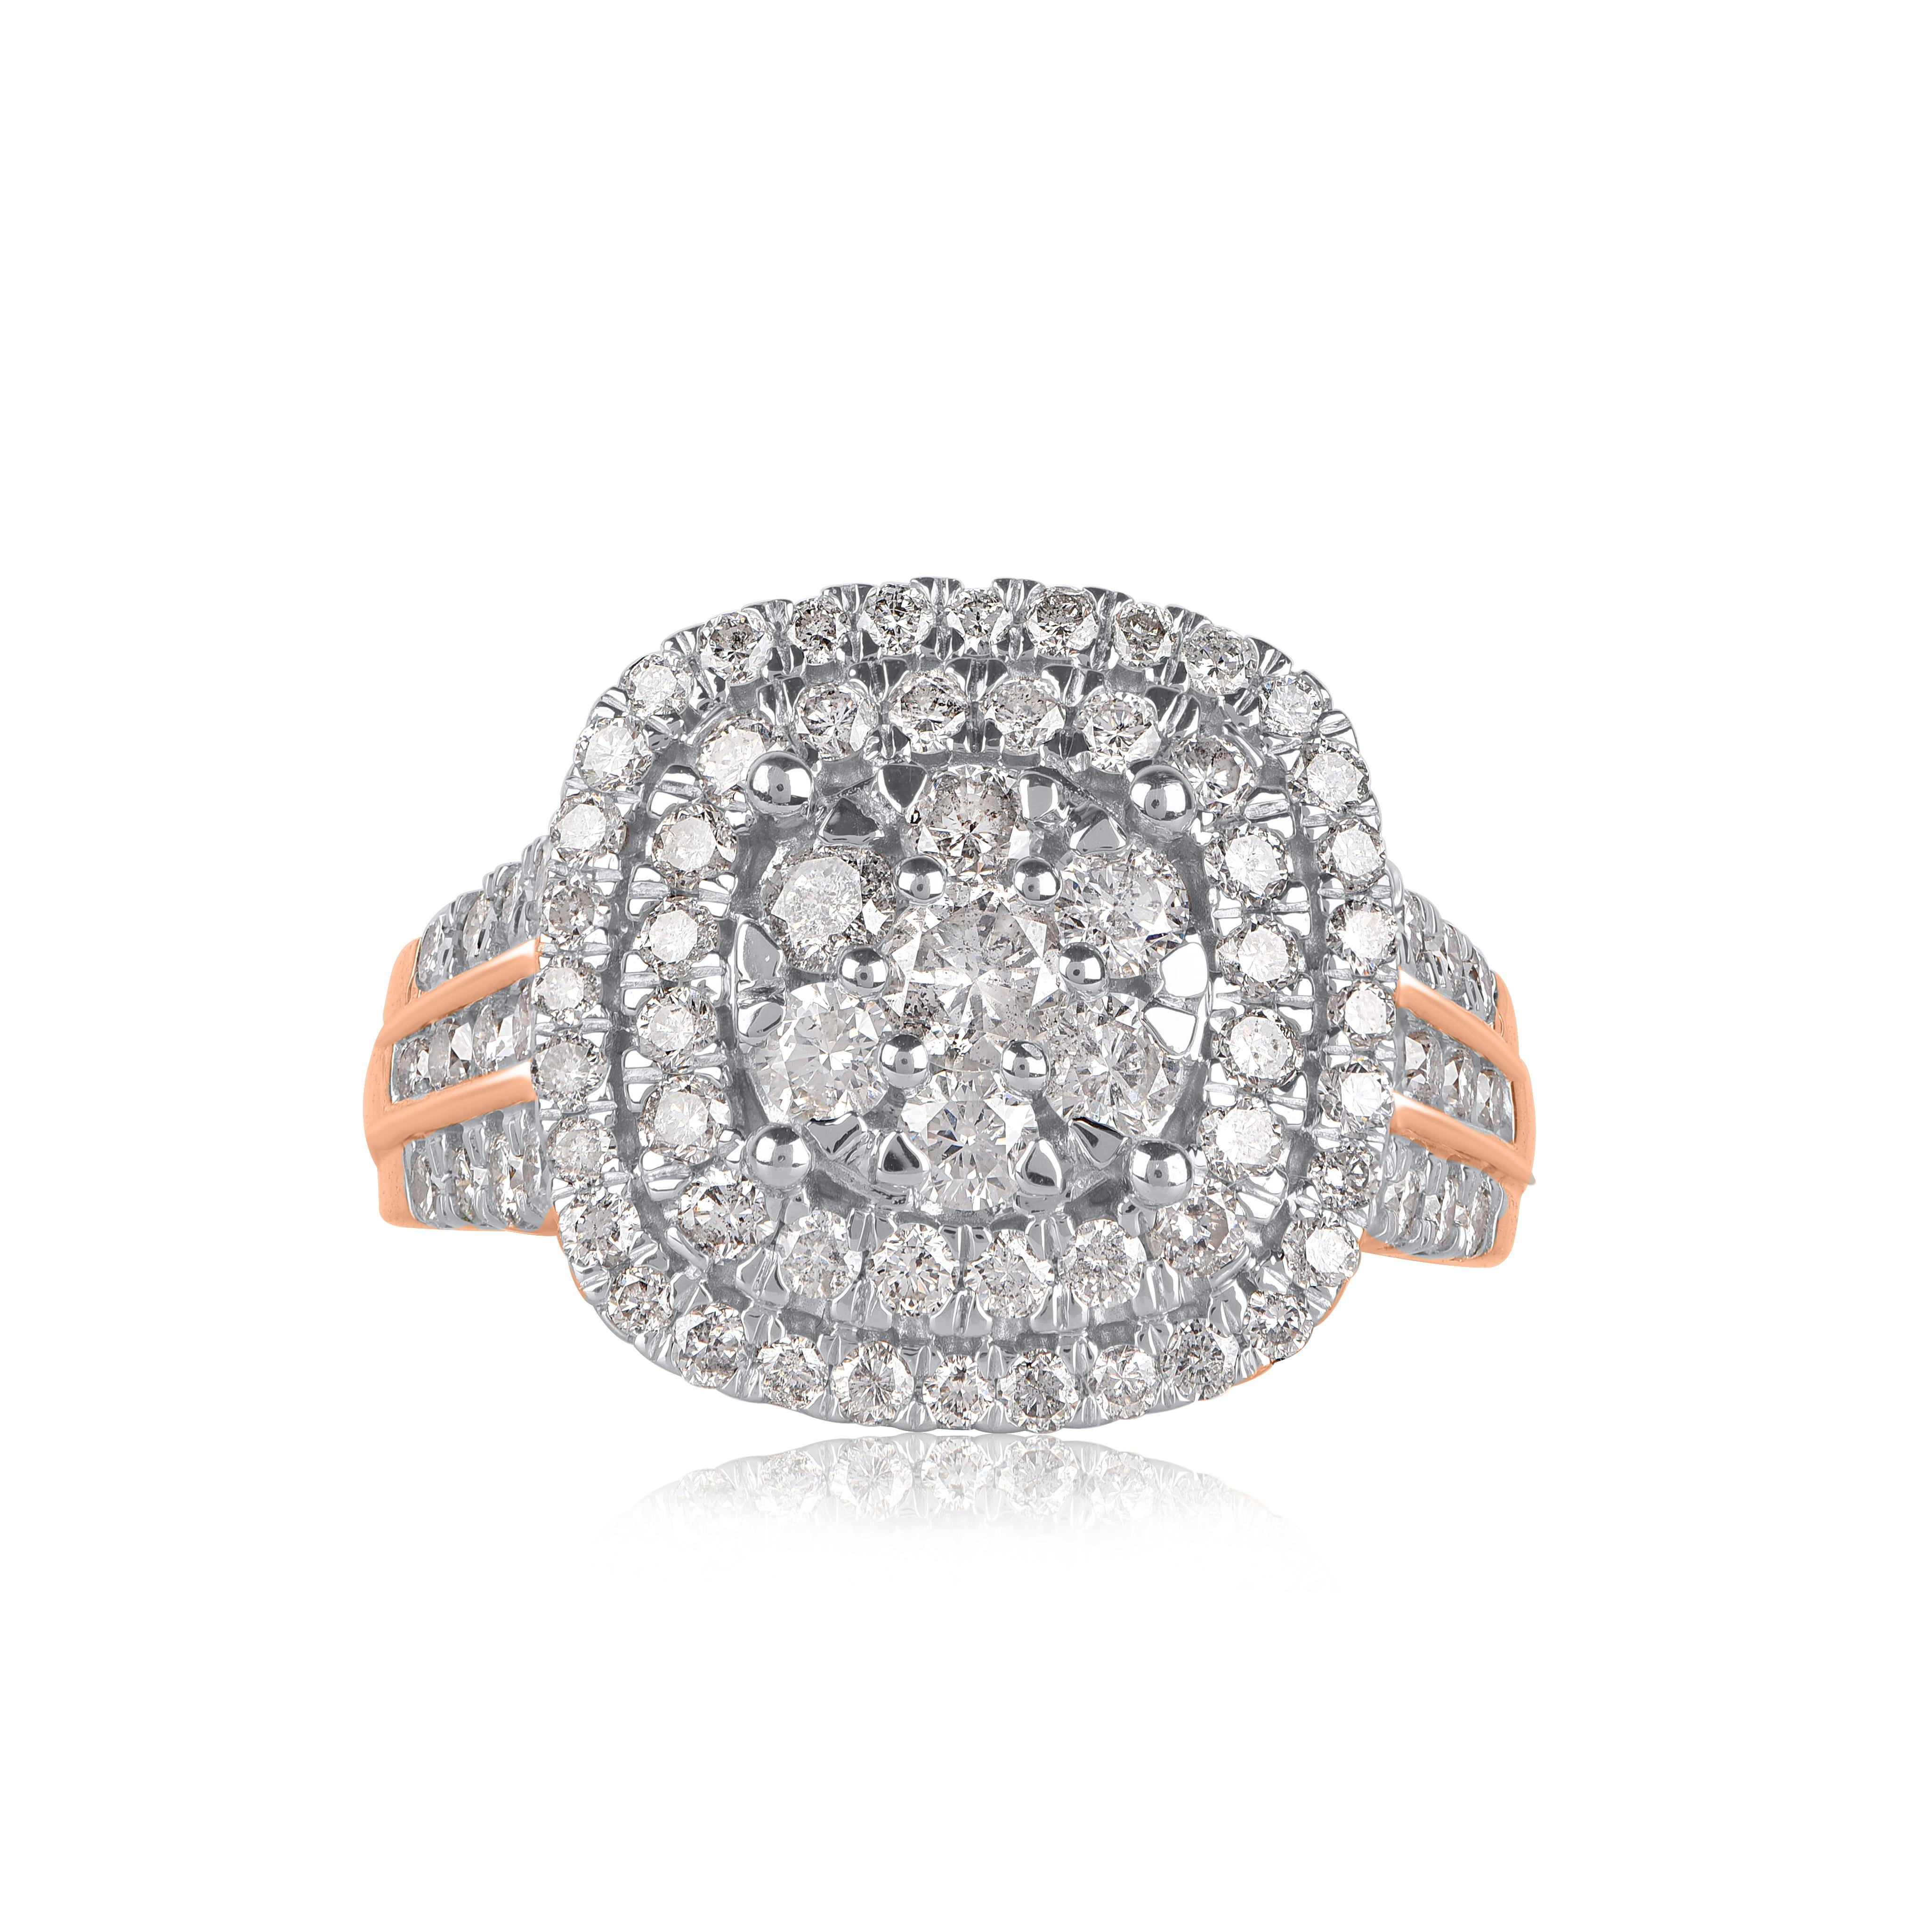 TJD 2.00 Carat Round Diamond 14 Karat Rose Gold Enchanting Ring Bridal Set In New Condition For Sale In New York, NY